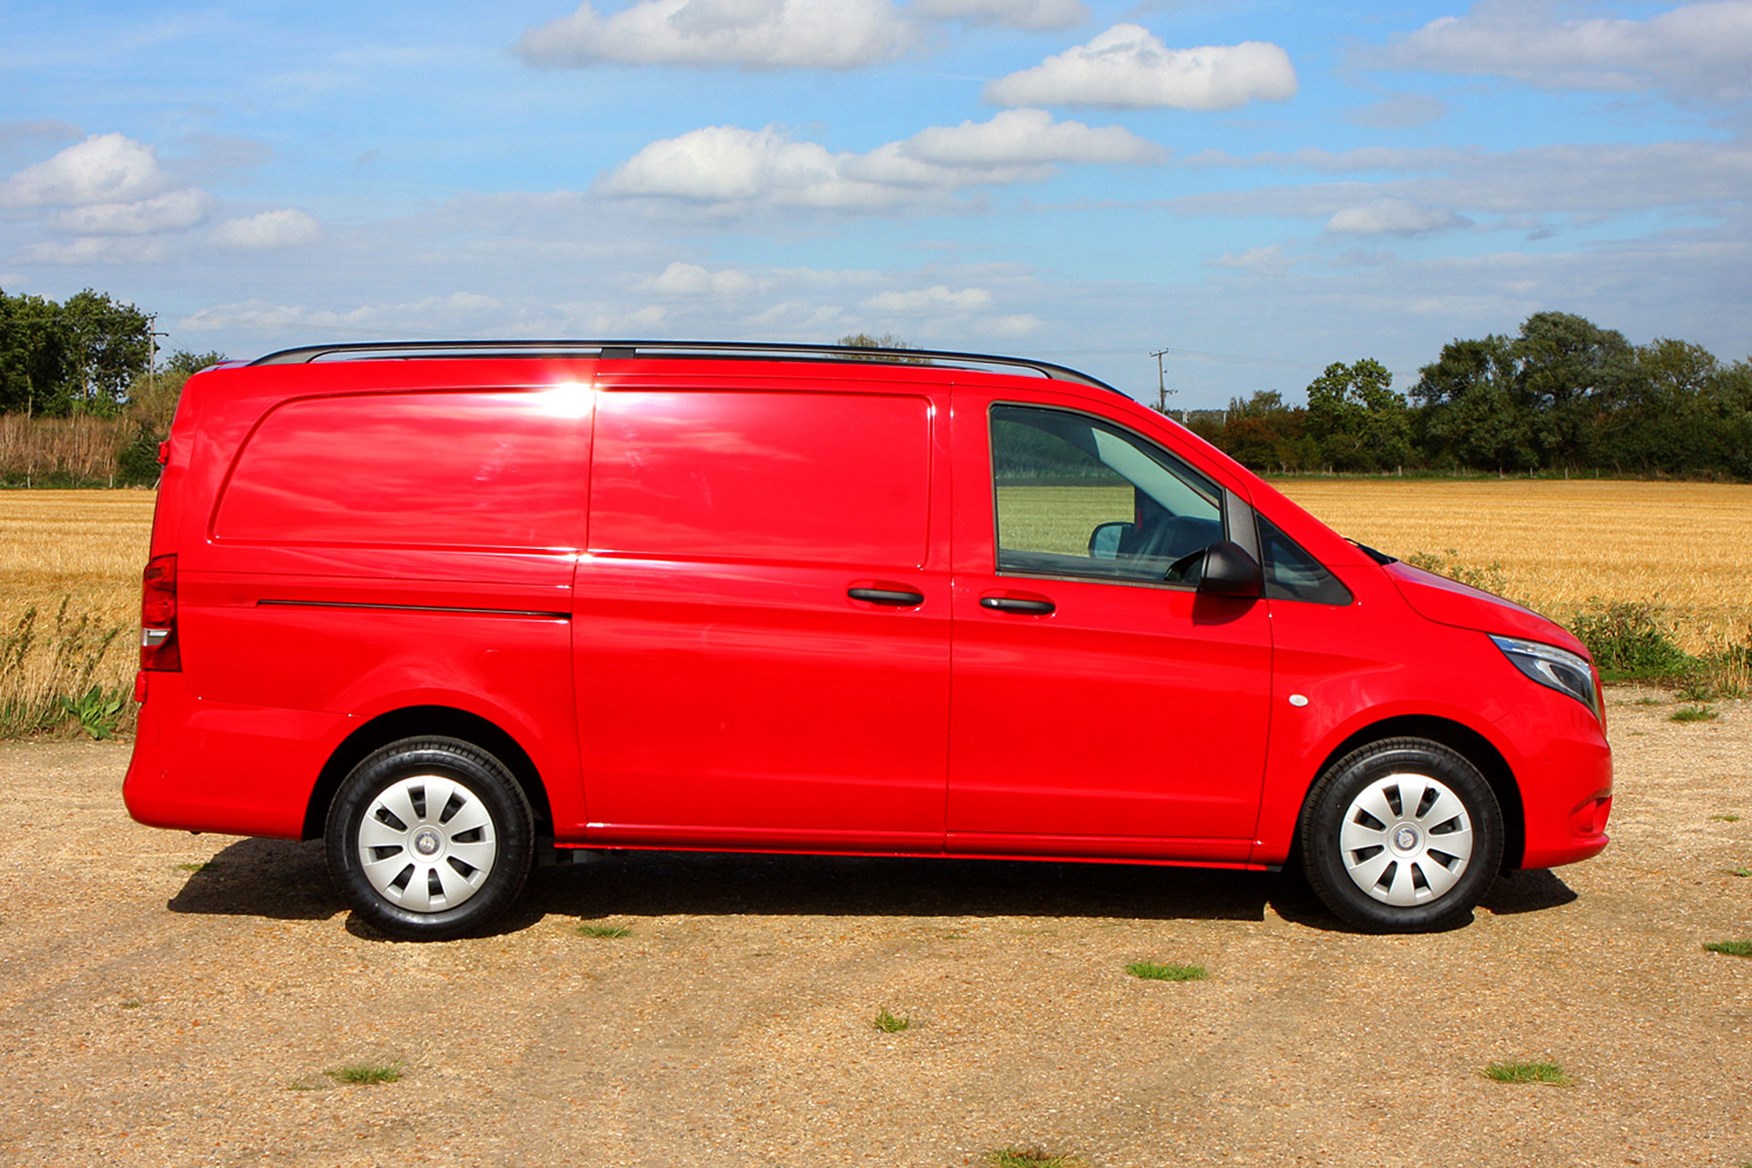 Mercedes-Benz Vito 111CDi Long review - side view, red